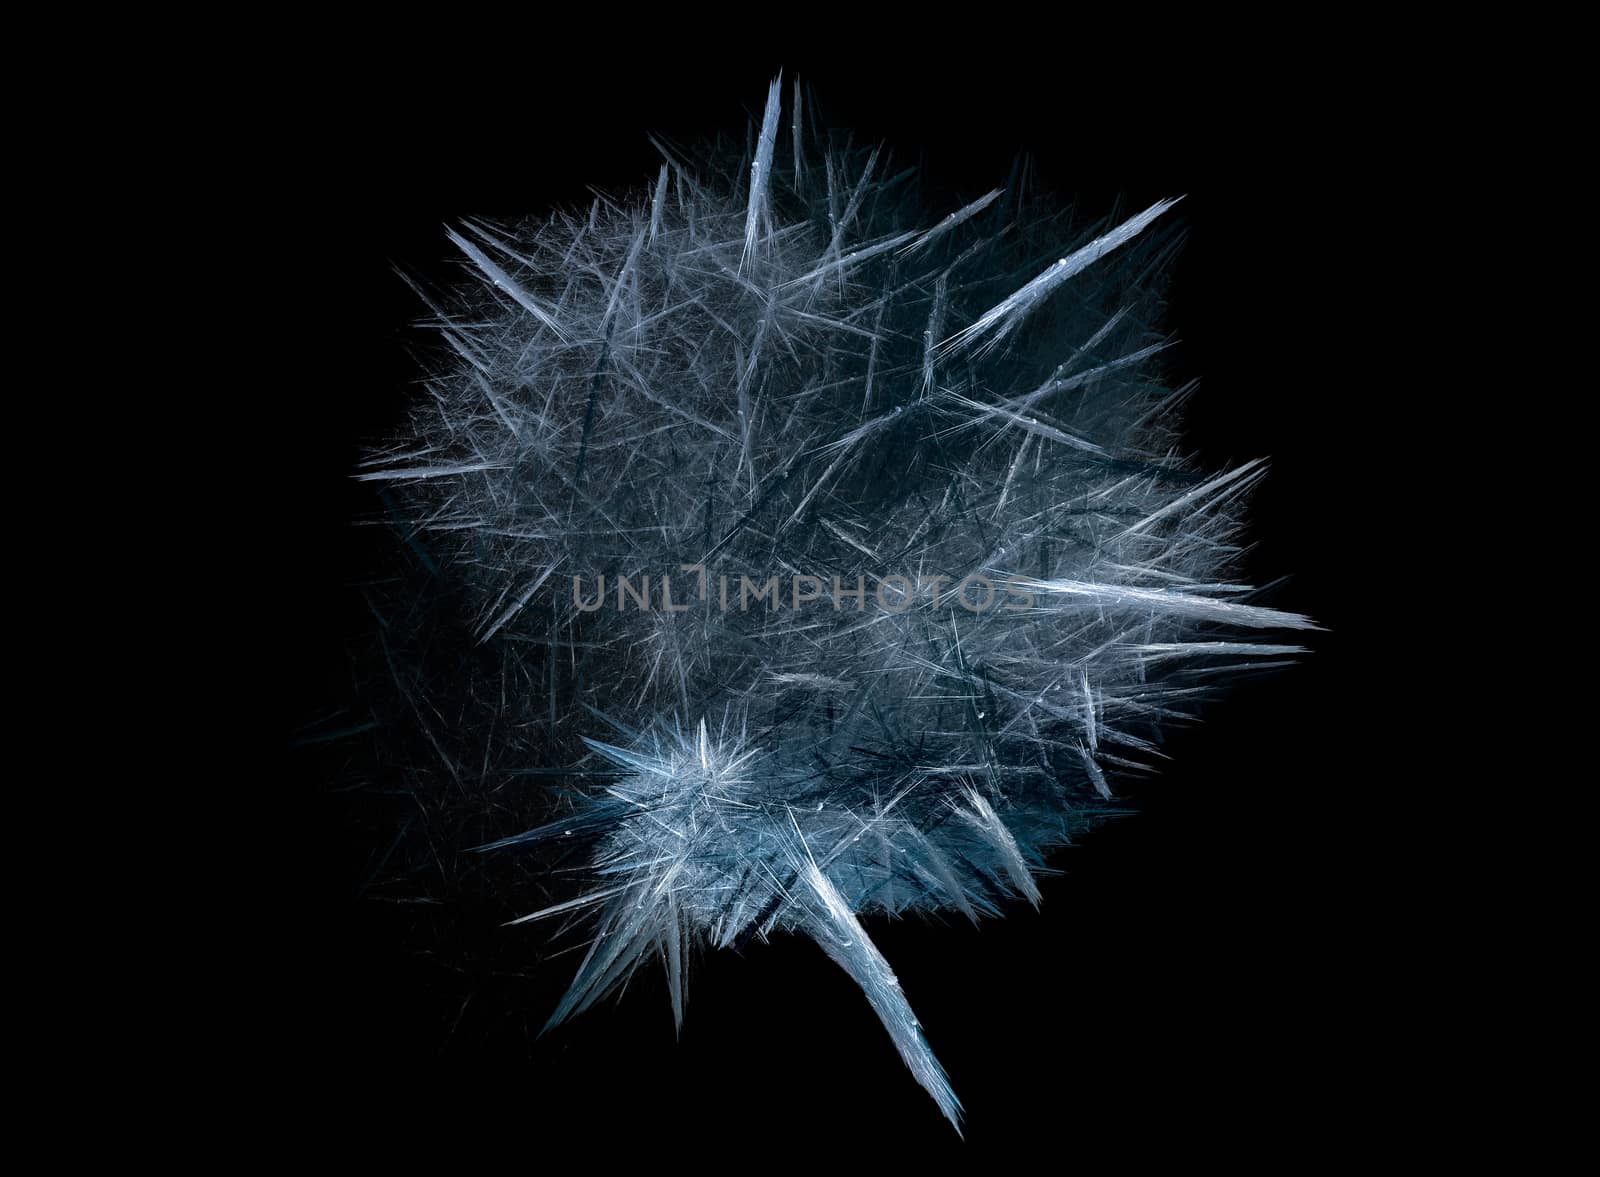 Cool spiky crystal fractal on black background by Gaina